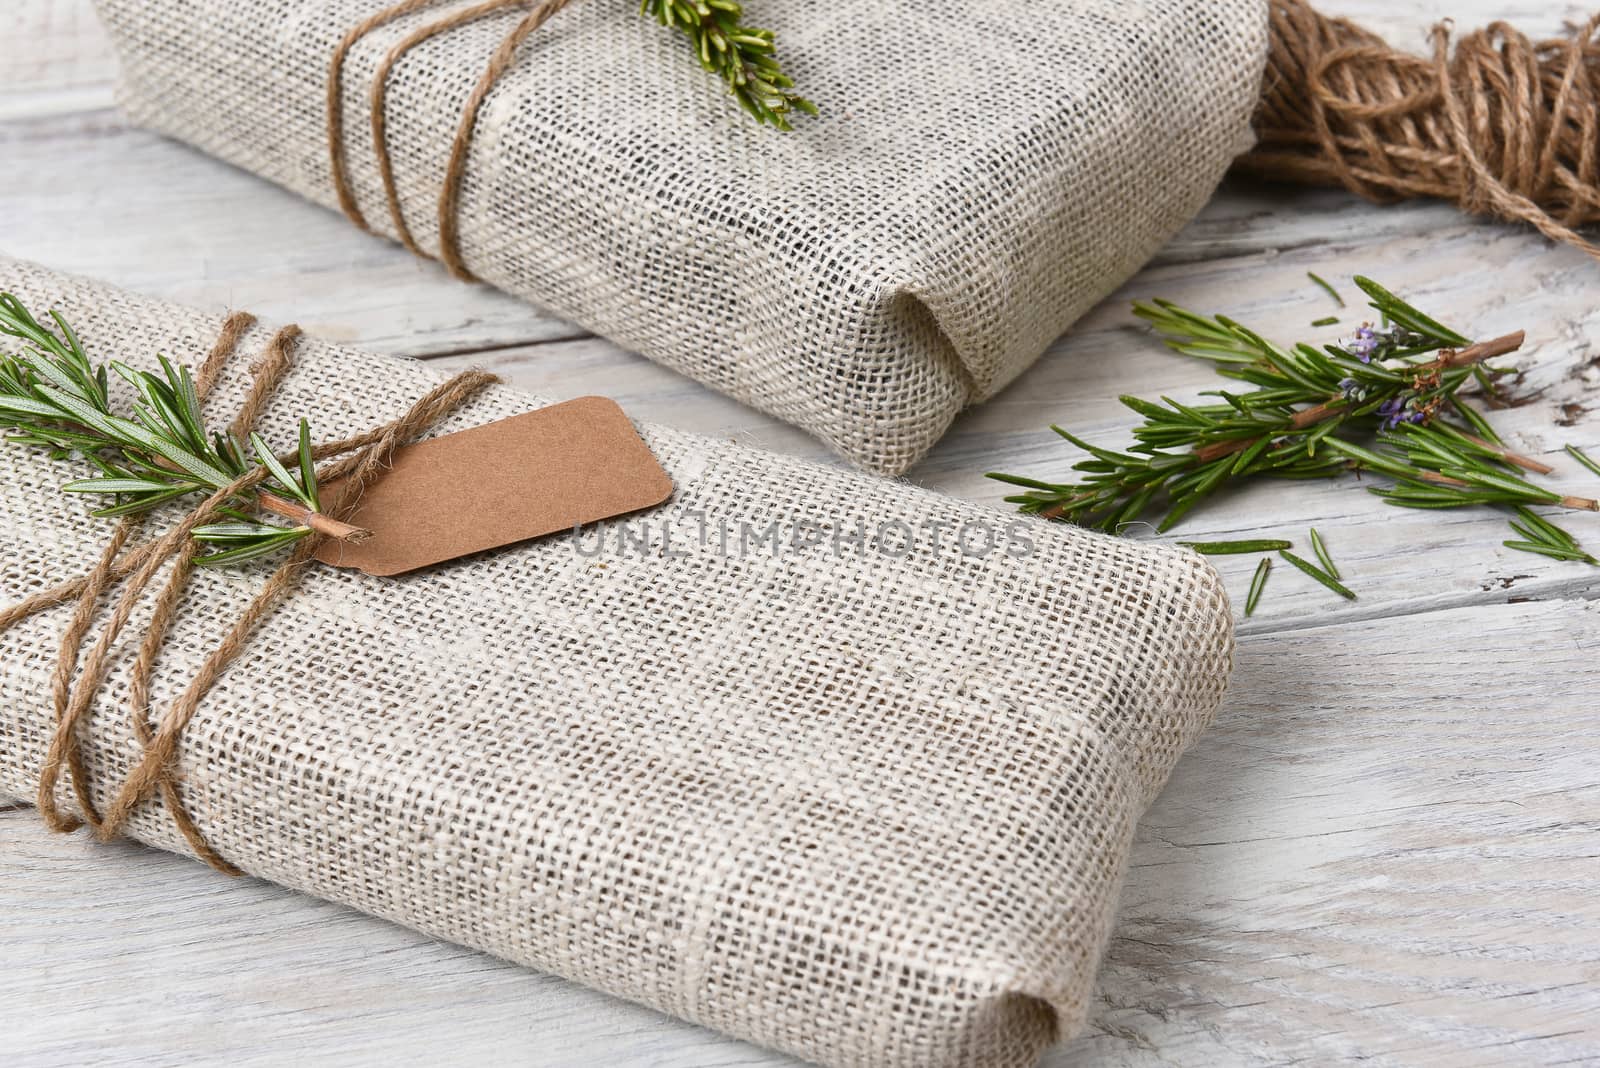 Closeup of two fabric wrapped Christmas presents on a rustic wood table.